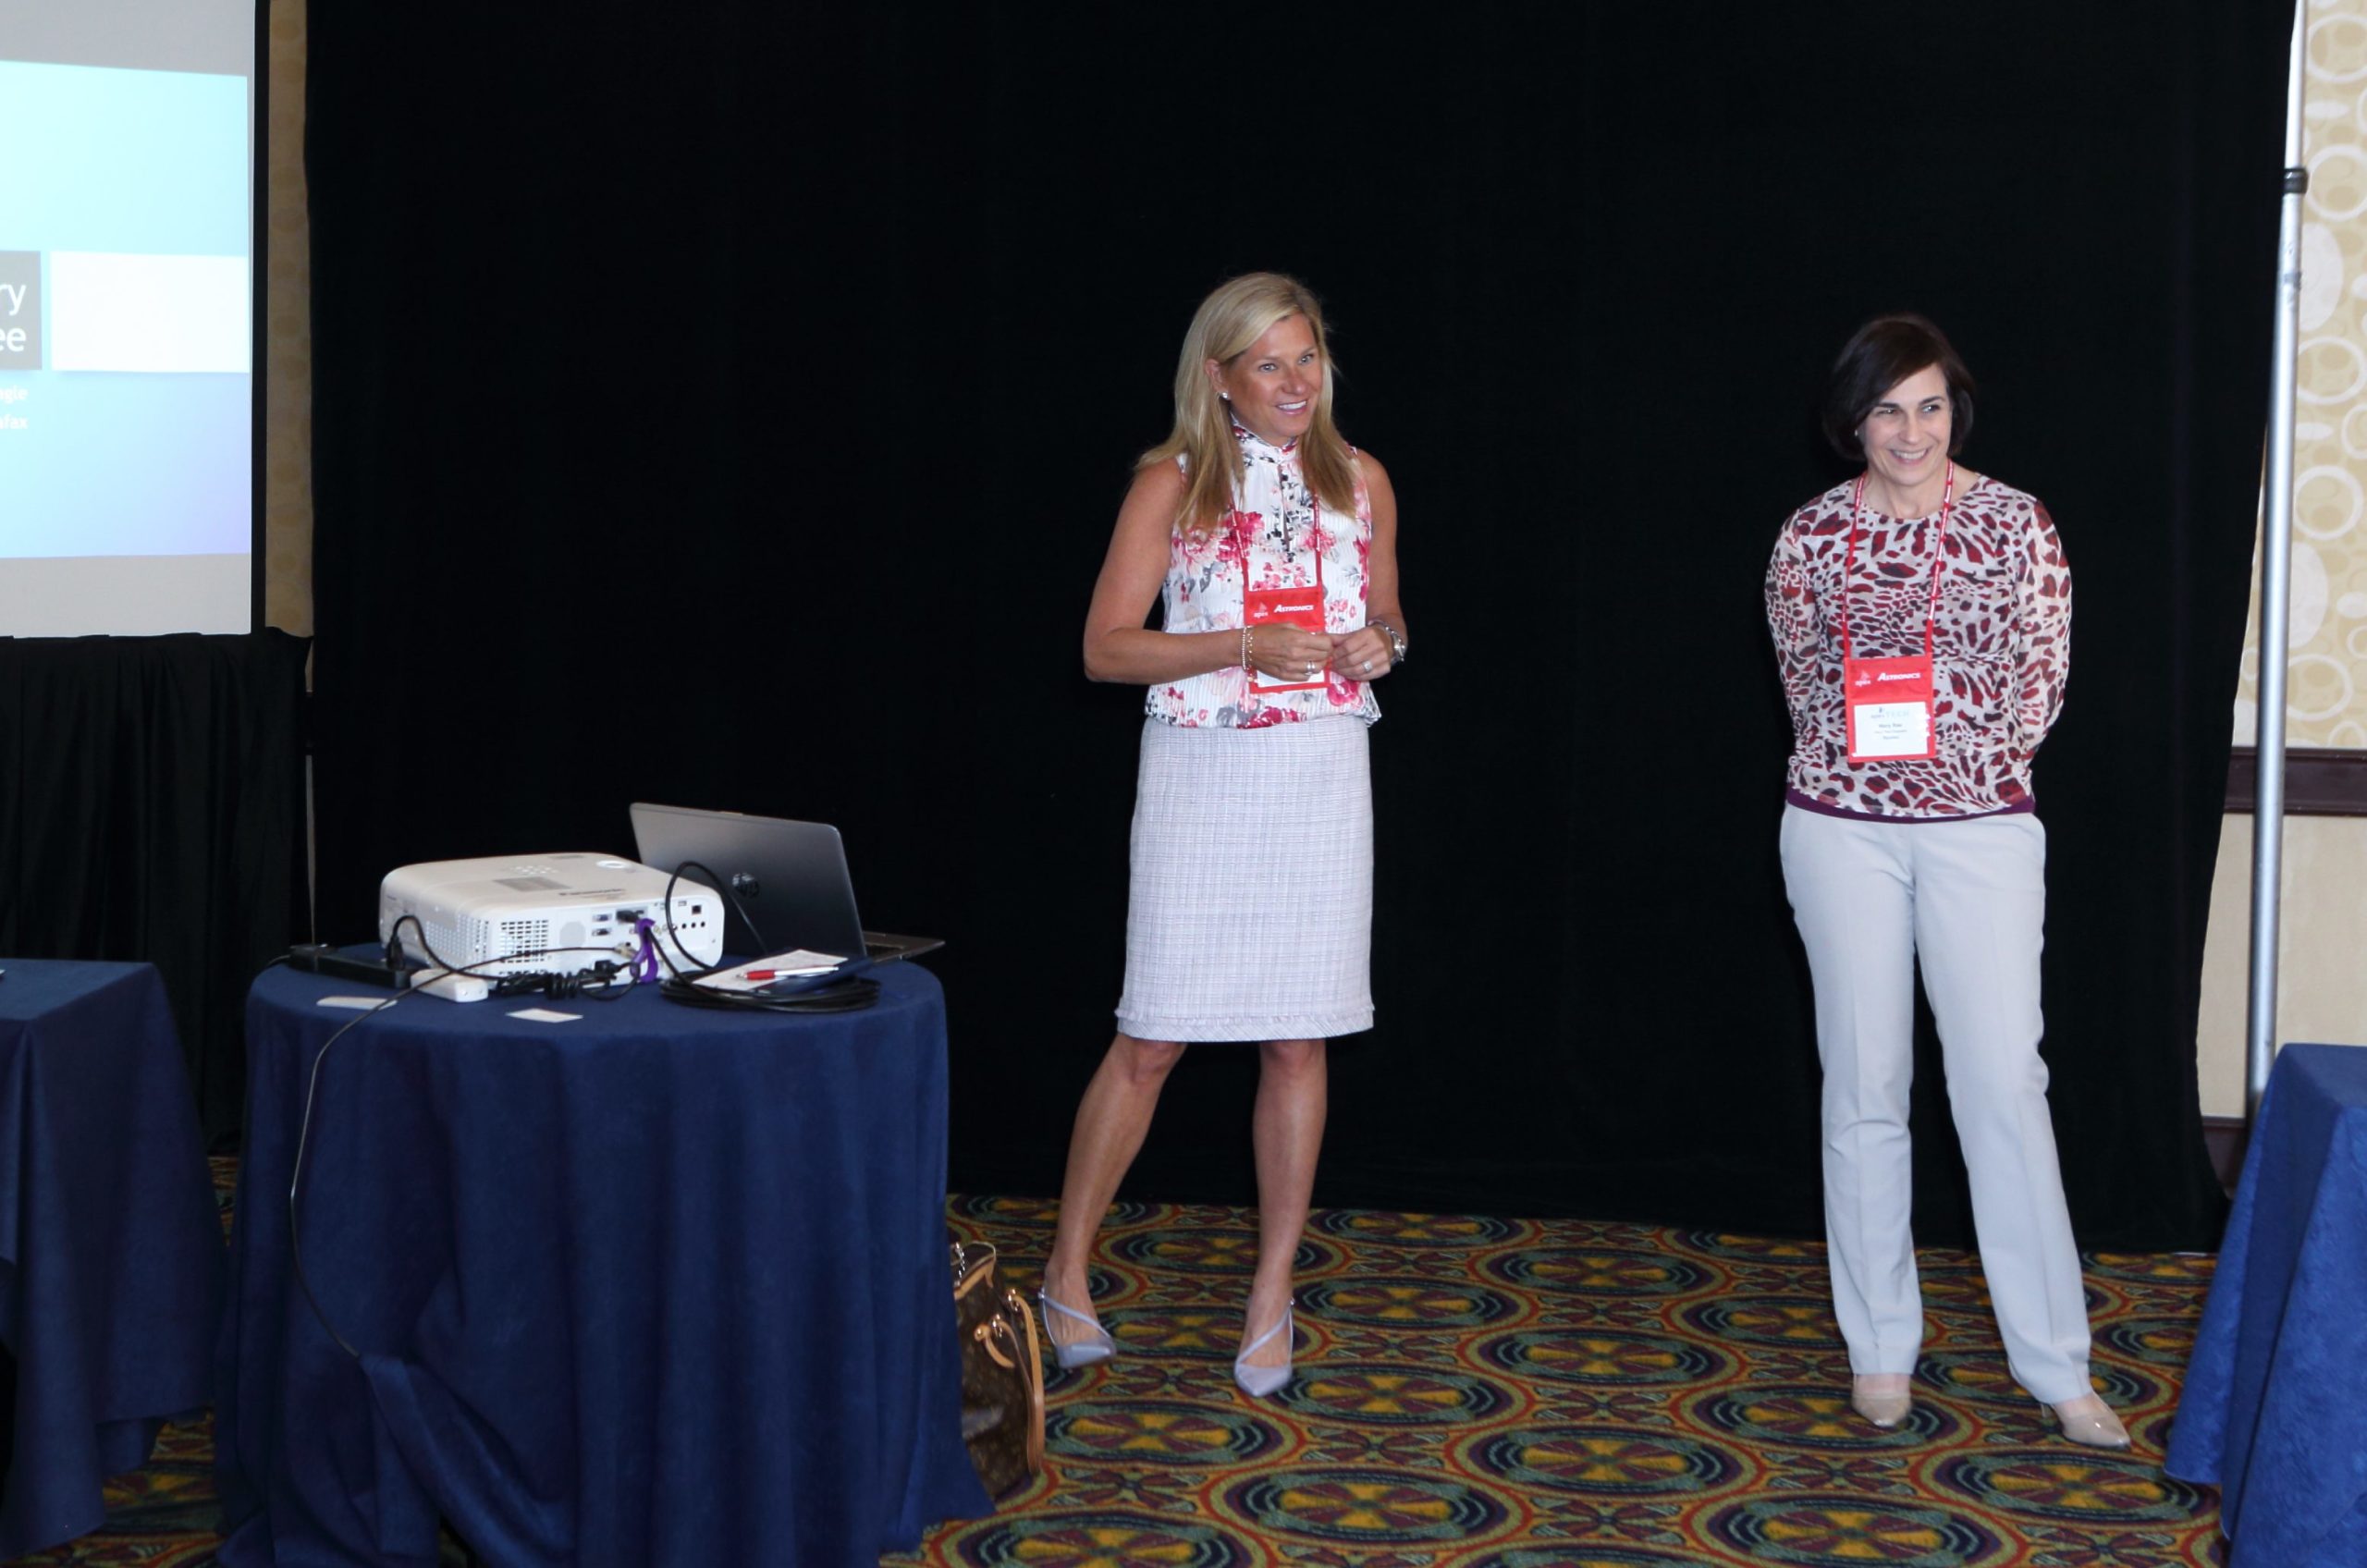 Pictured left to right: Kimberly Creaven, VP of Global Advertising, Sponsorships and Advertising at Global Eagle and chair of ARC; and Mary Rae, media sales director, US at Spafax and ARC member.